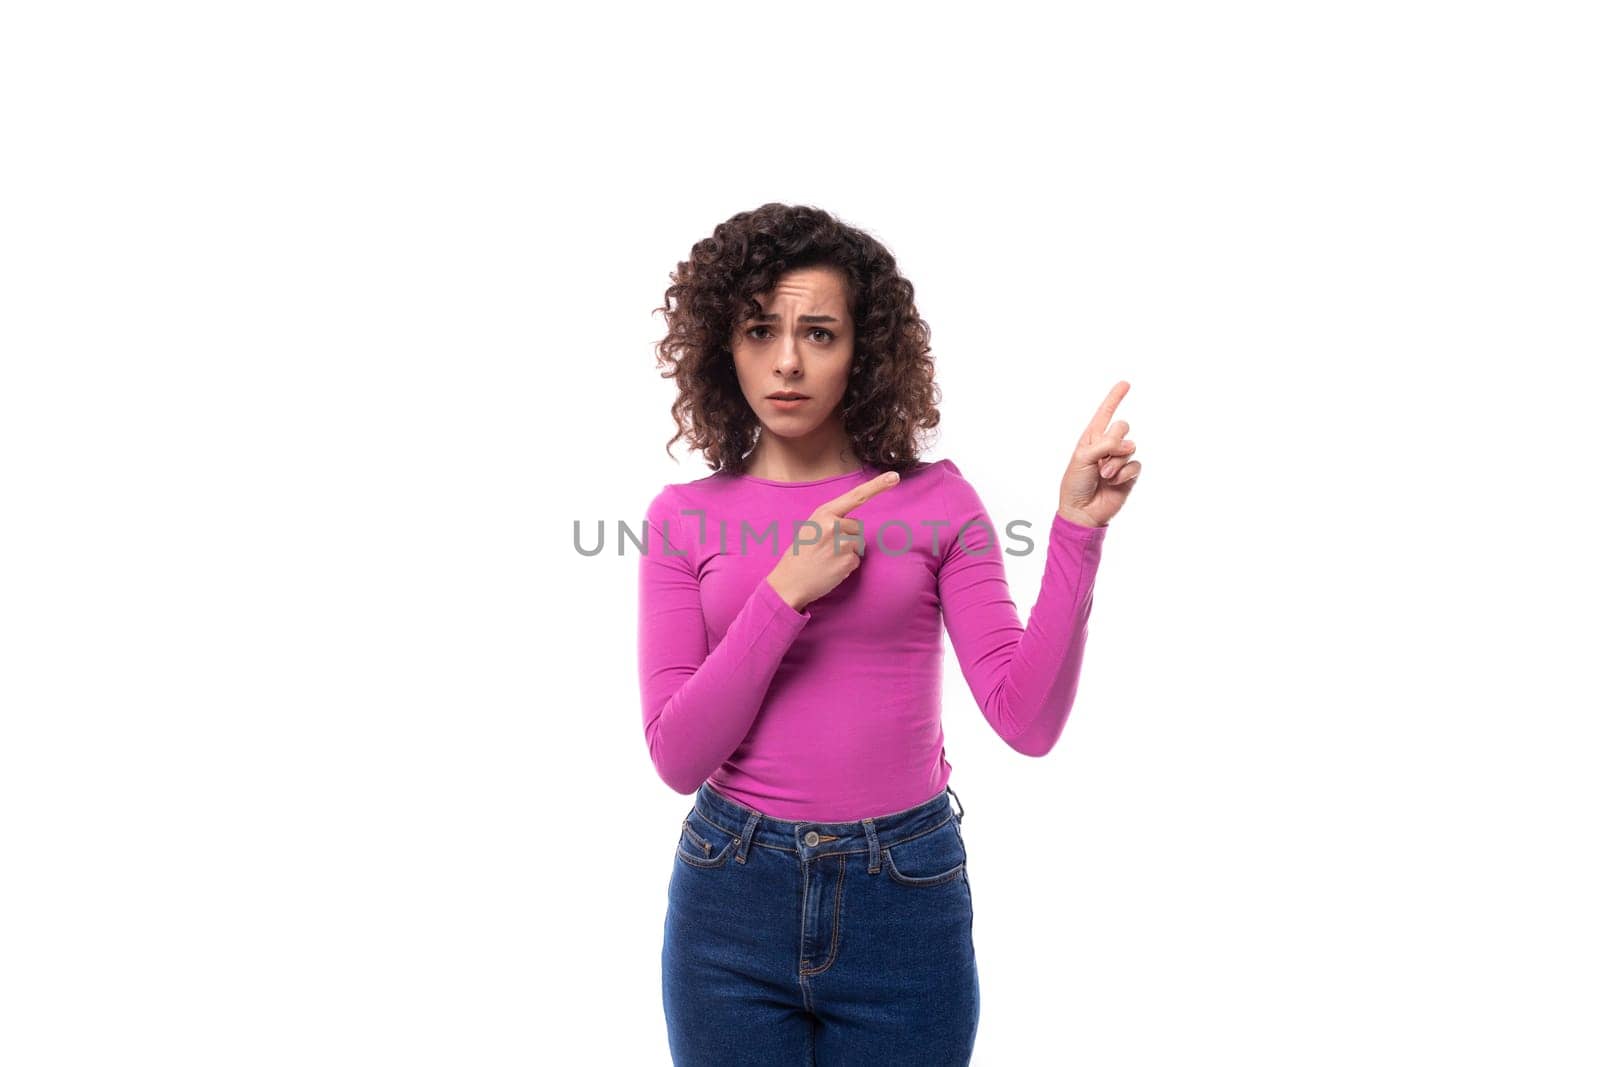 pretty smiling young curly brunette woman dressed in a purple turtleneck points with her hands at the advertisement by TRMK